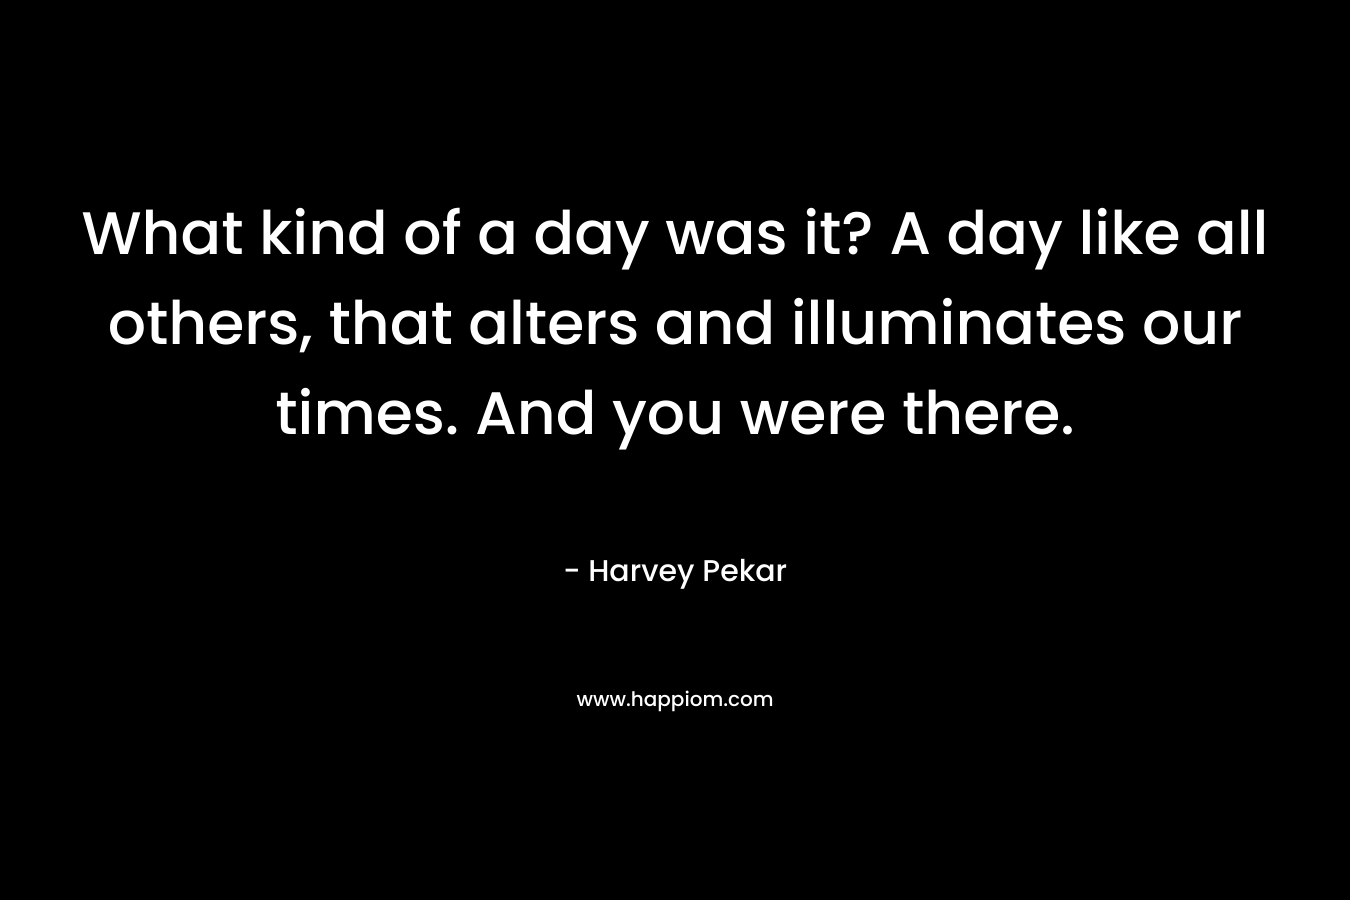 What kind of a day was it? A day like all others, that alters and illuminates our times. And you were there. – Harvey Pekar